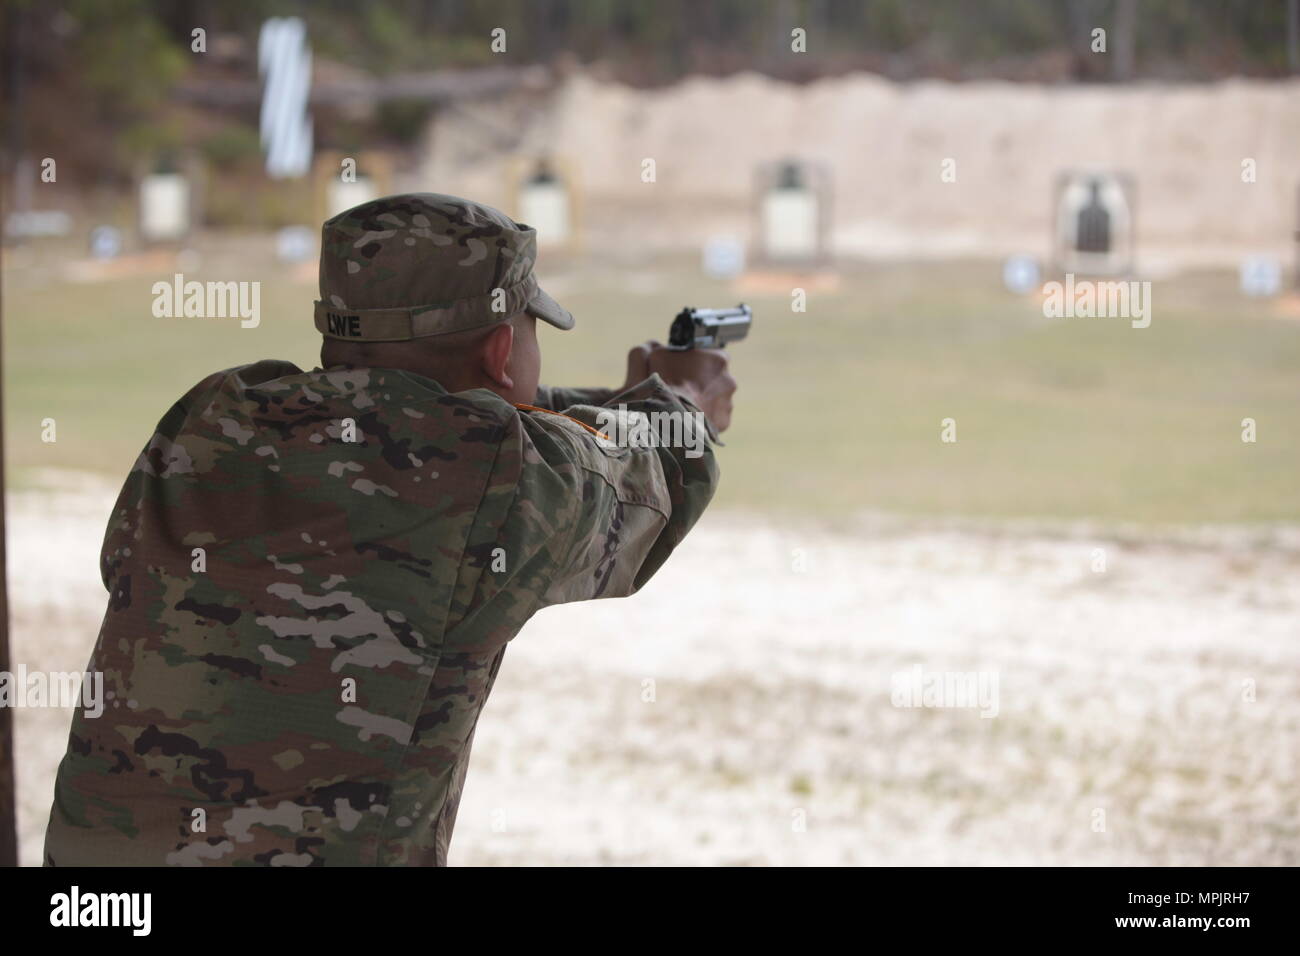 U.S. Army 2nd Lieutenant Daniel Lwe, attached to the 982D Combat Camera Company (Airborne), qualifies with the 9M at a range on Fort Jackson, S.C., March 18, 2017. The 982nd Combat Camera Company (Airborne) is one of only two combat camera companies in the U.S. Army tasked with providing the Office of the Secretary of Defense, Chairman of the Joint Chiefs of Staff, and the military departments with a directed imagery capability in support of operational and planning requirements through the full range of military operations. (U.S. Army Photo by SPC Kristen Dobson) Stock Photo